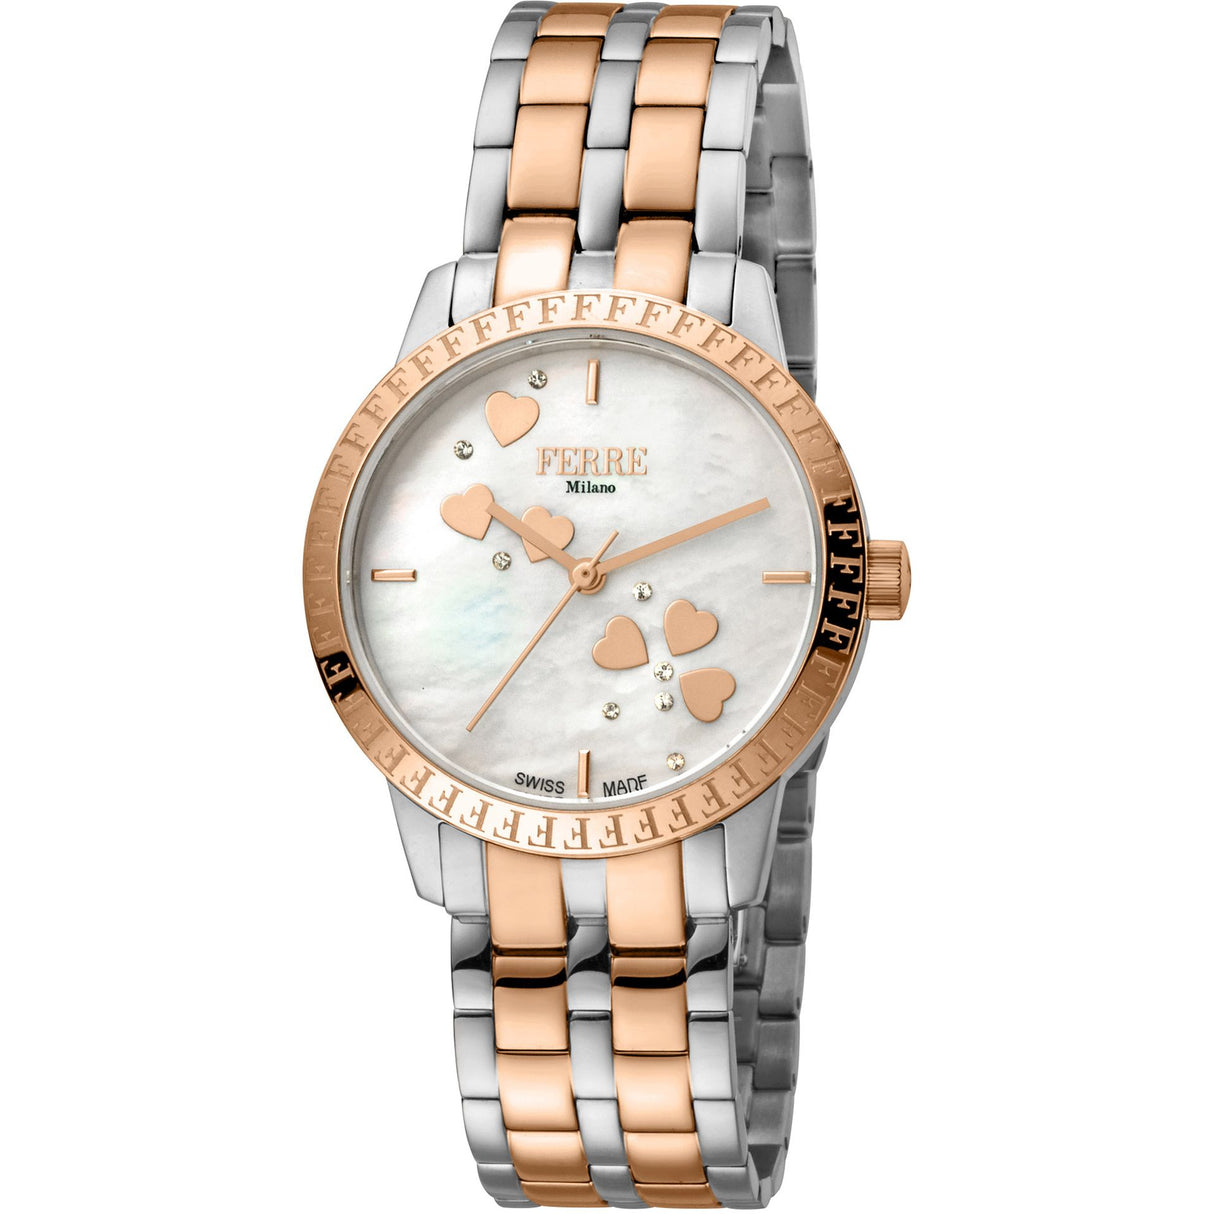 Ferrè Milano Lady watch Women's watch Quartz watch Analog watch Stainless steel watch Rose gold watch Mother-of-pearl dial watch Antique white dial watch Metal bracelet watch Swiss-made movement Fashion watch Sophisticated watch Classic watch Luxury watch Iridescent watch Unique watch